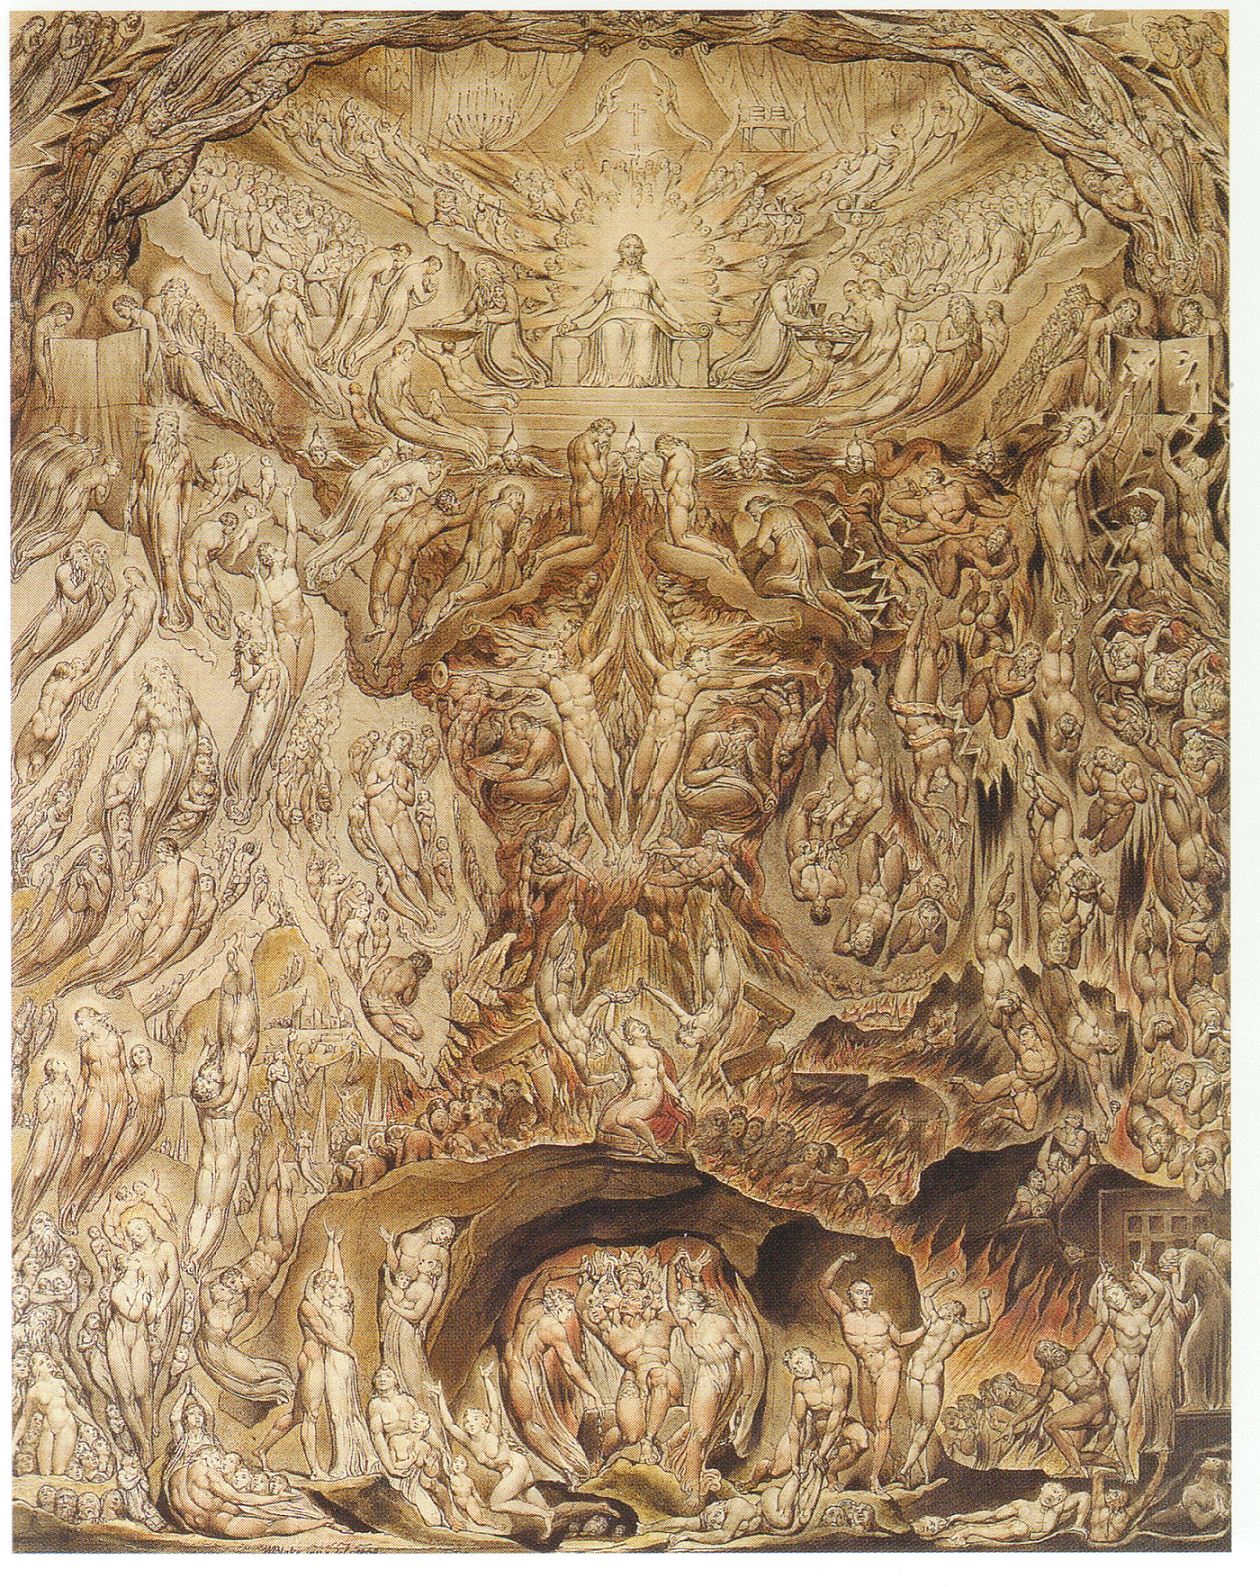 A Vision of the Last Judgment